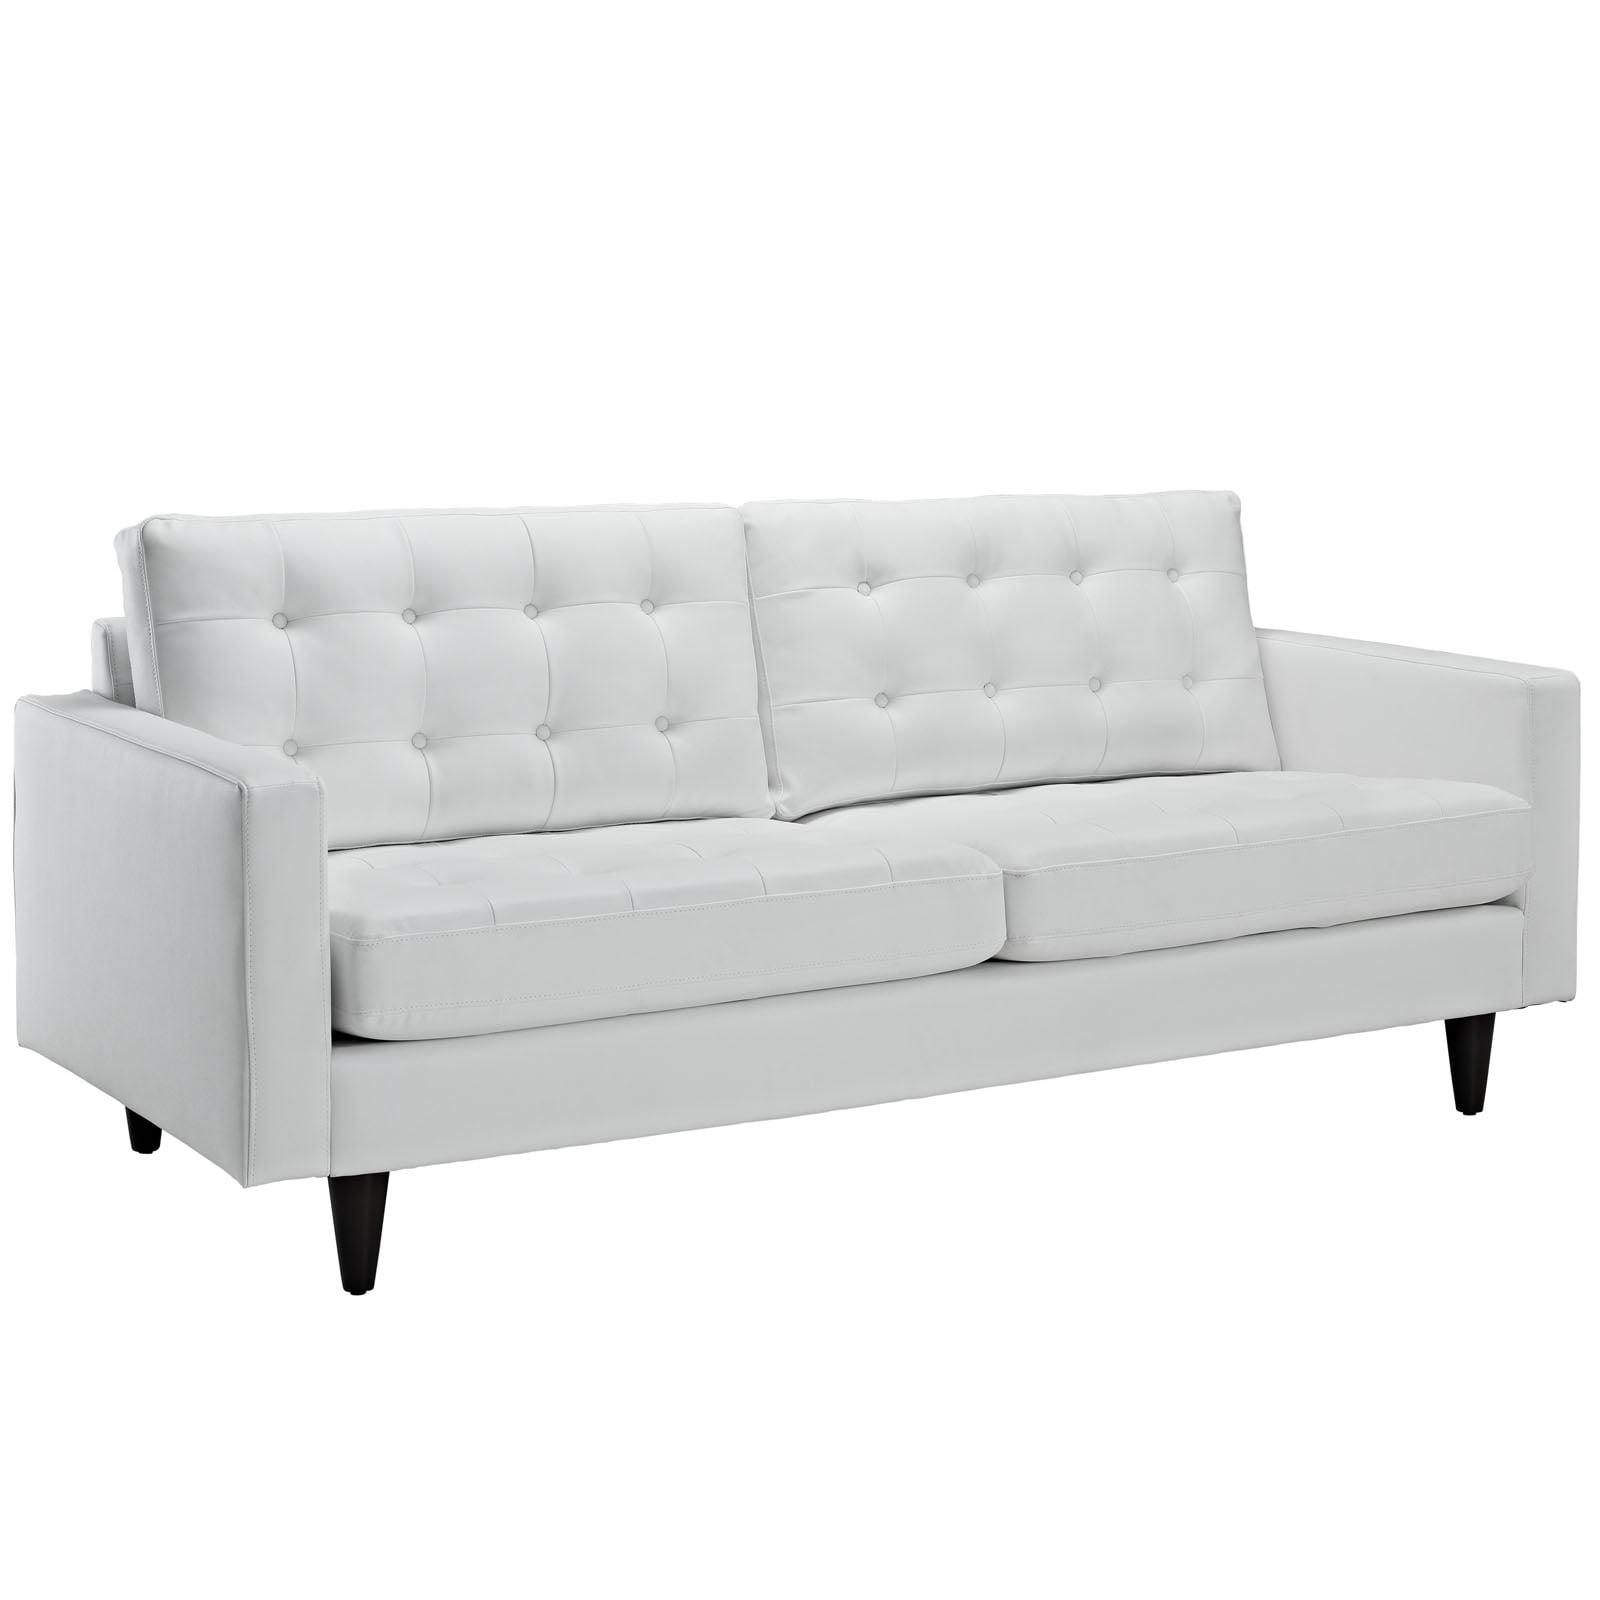 Loveseat Contemporary White Leather Living Room Set Modern Sofa Couch Chair 